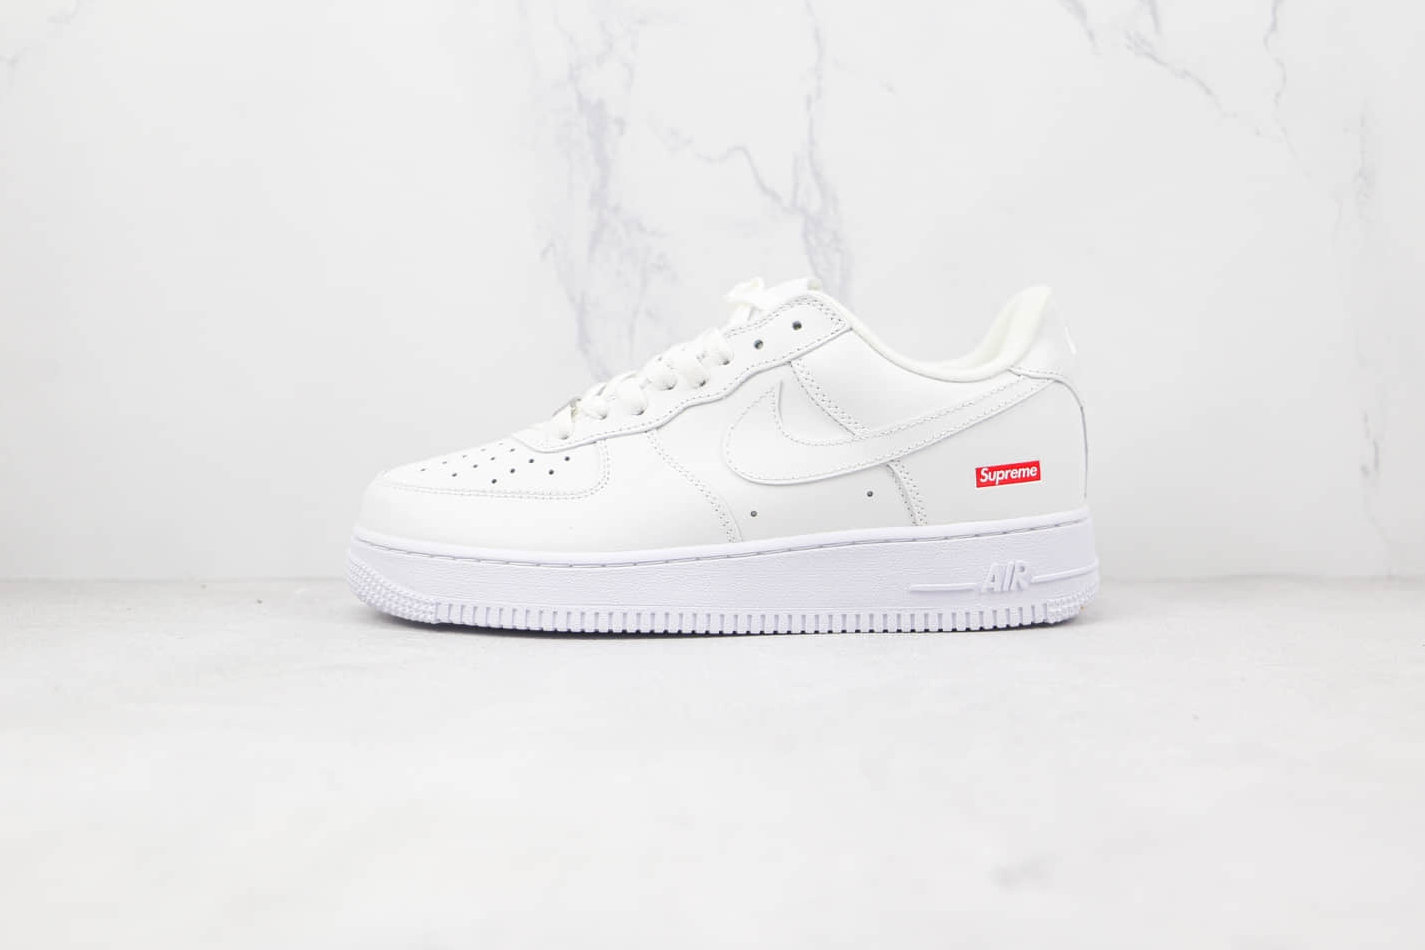 Nike Supreme x Air Force 1 Low 'Box Logo - White' CU9225-100 | Limited Edition Sneakers